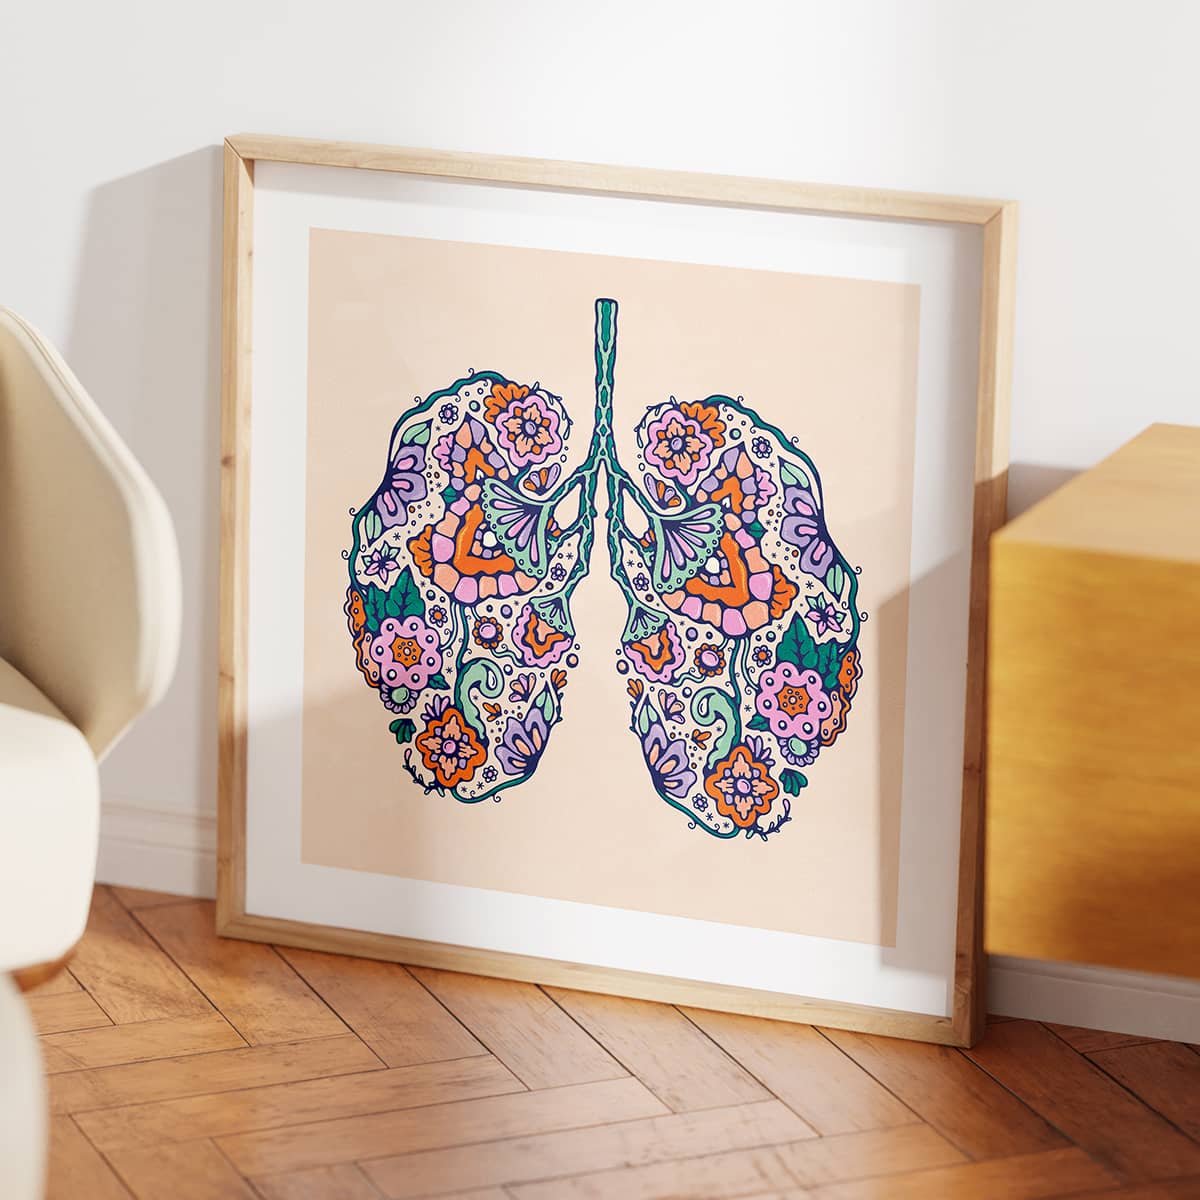 Intricate floral lungs drawing in retro illustration style